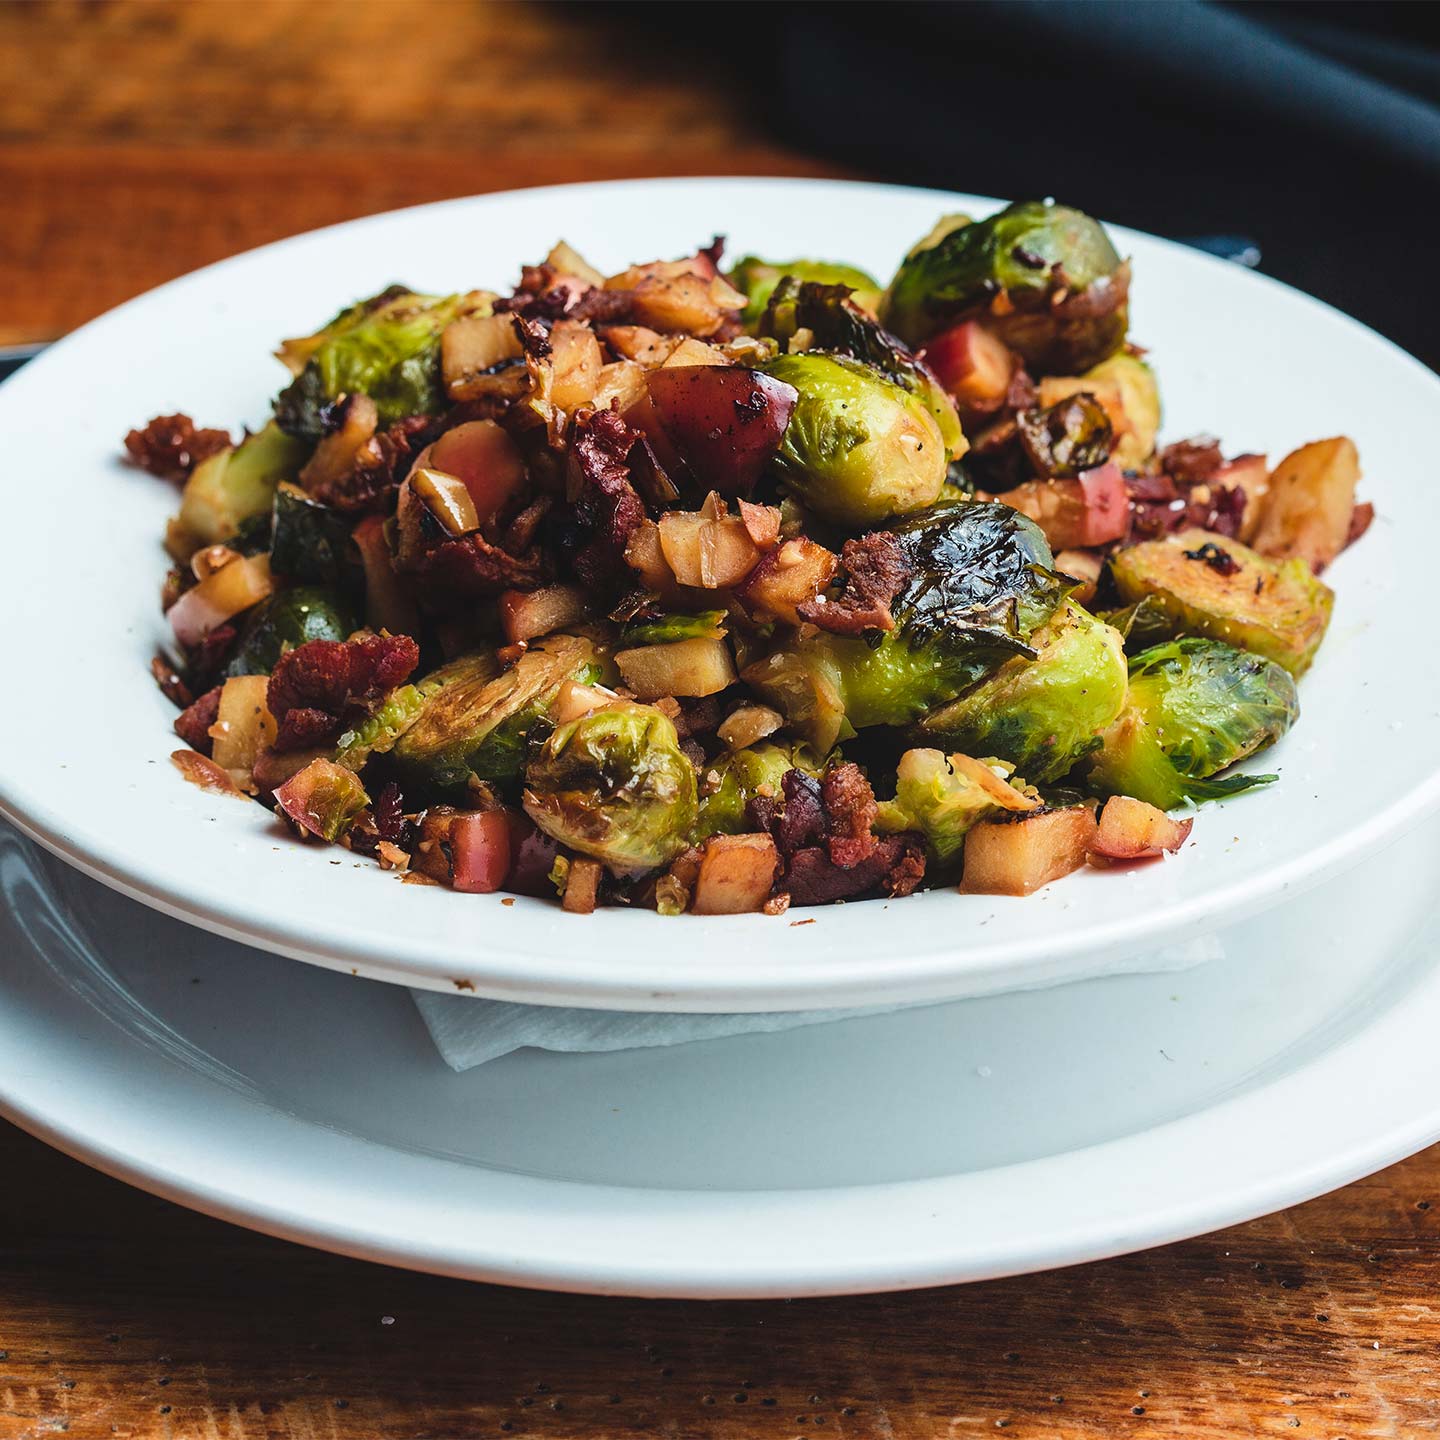 The FEED Co. Table & Tavern’s Sautéed  Brussels Sprouts with Gala Apples